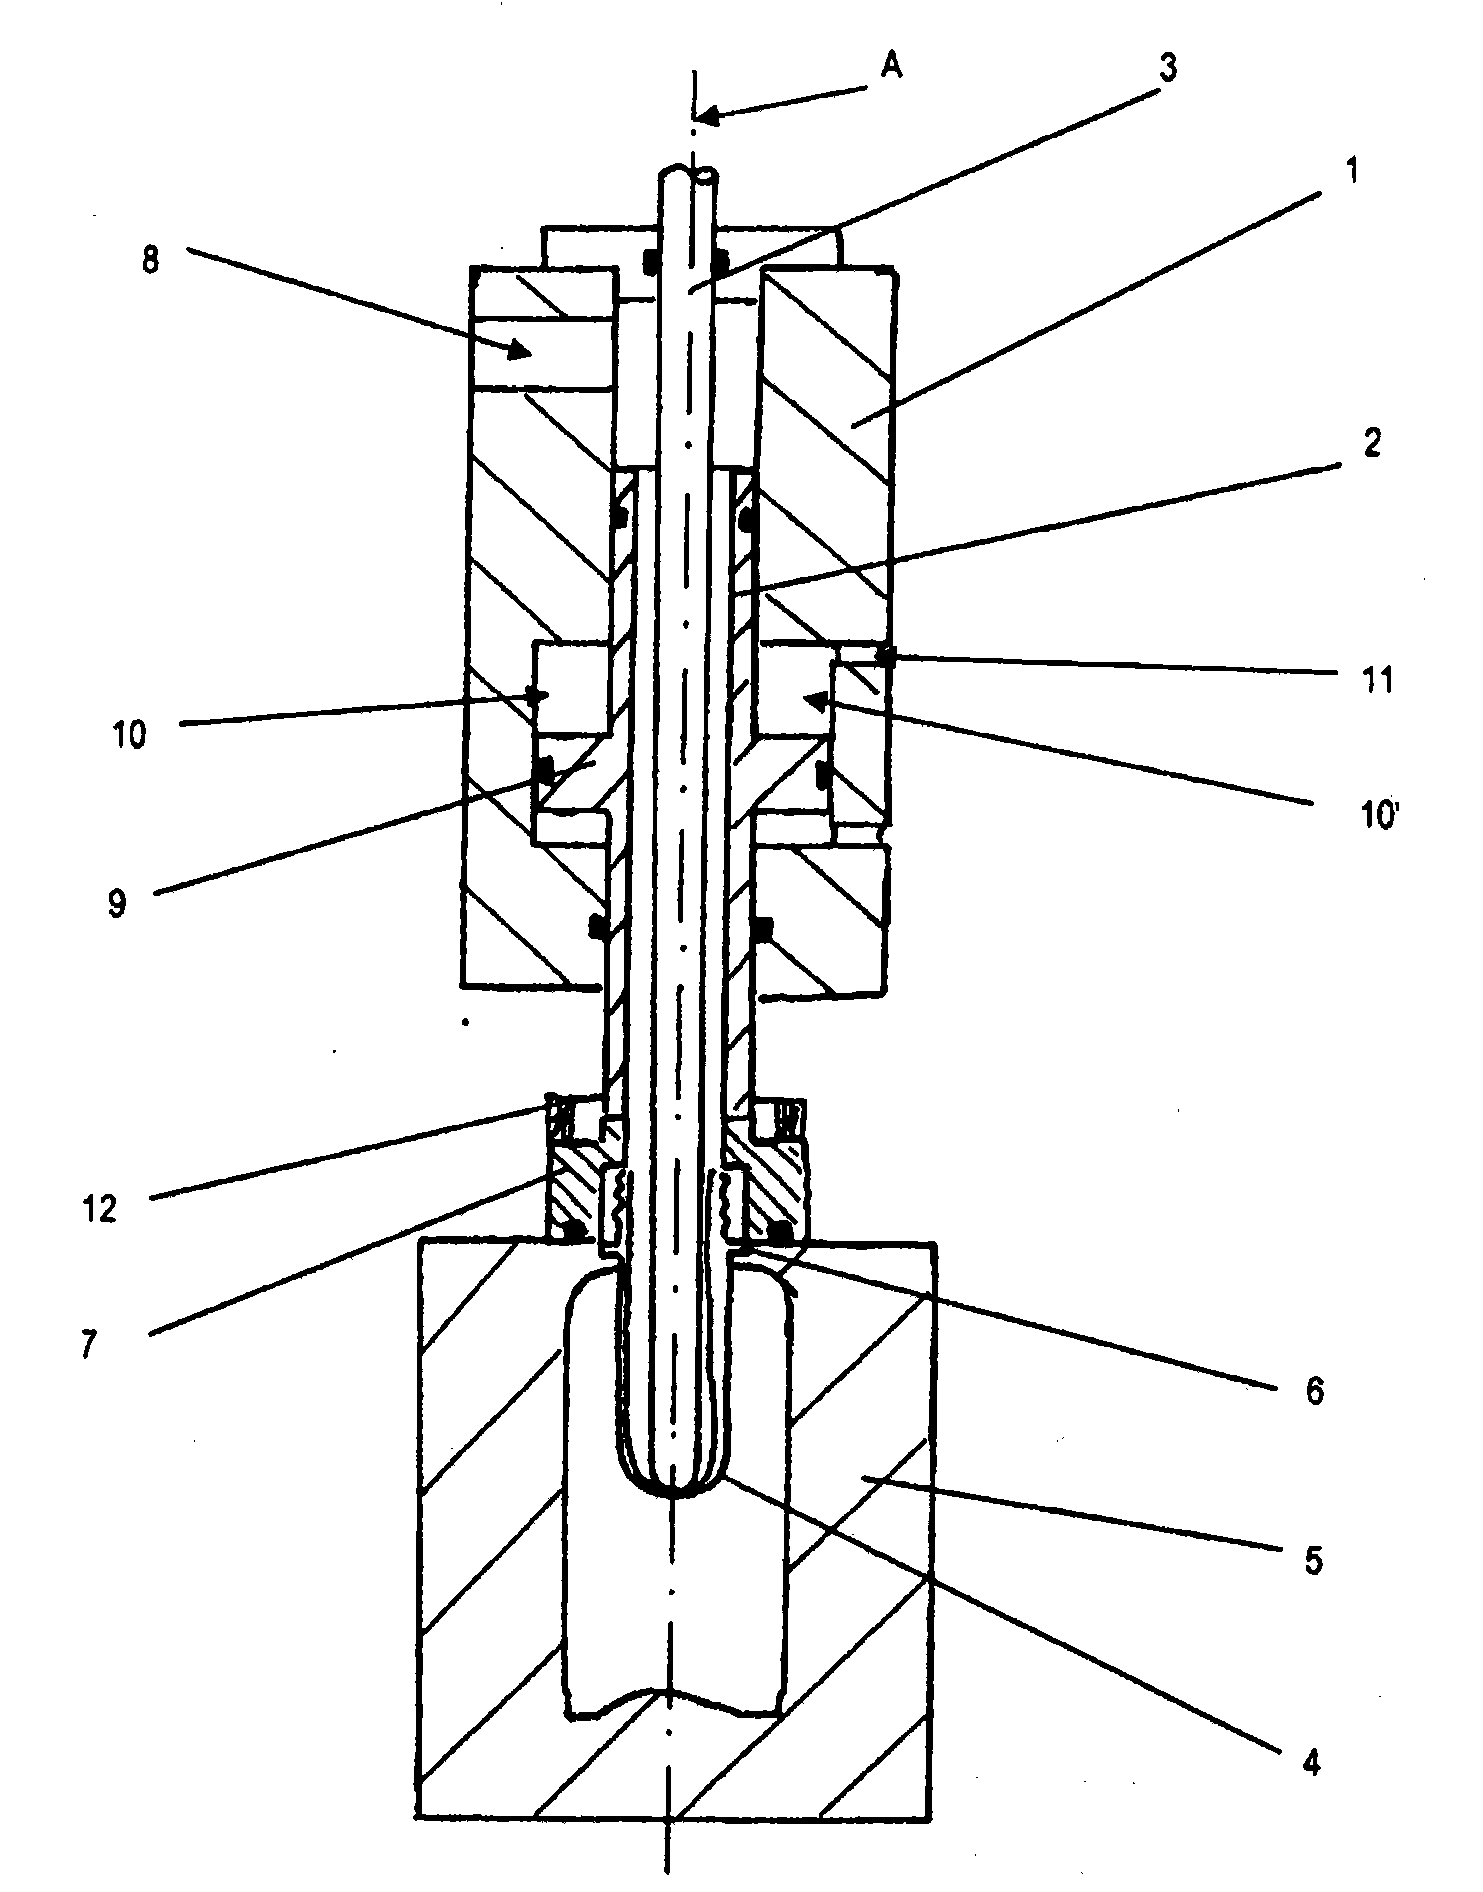 Device for injecting compressed air into a blow mold